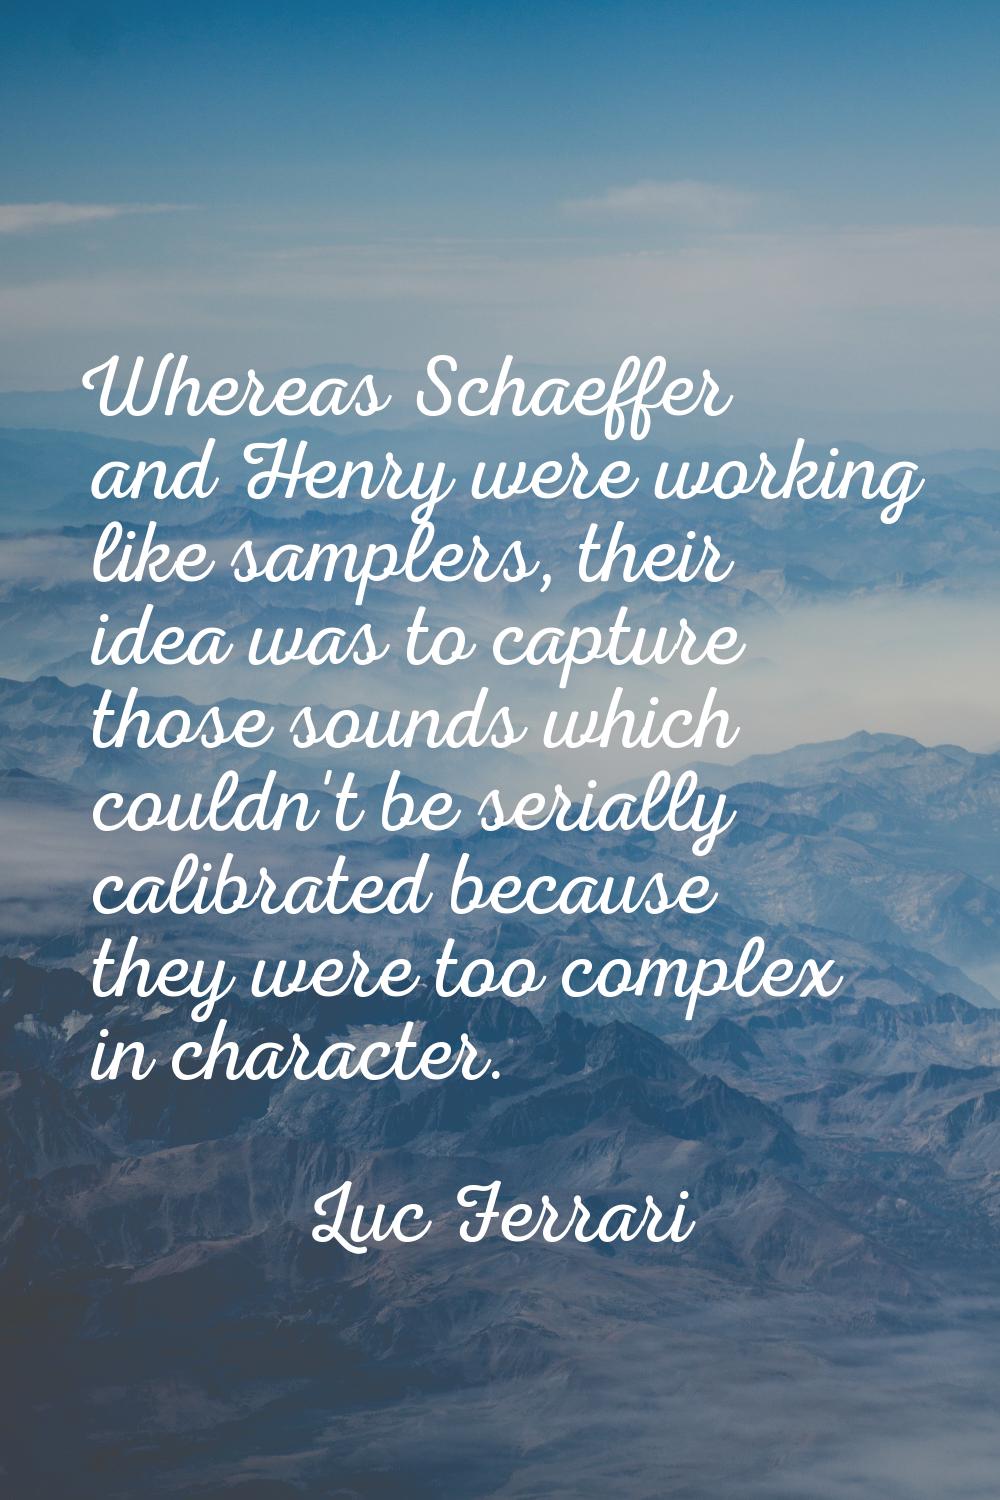 Whereas Schaeffer and Henry were working like samplers, their idea was to capture those sounds whic